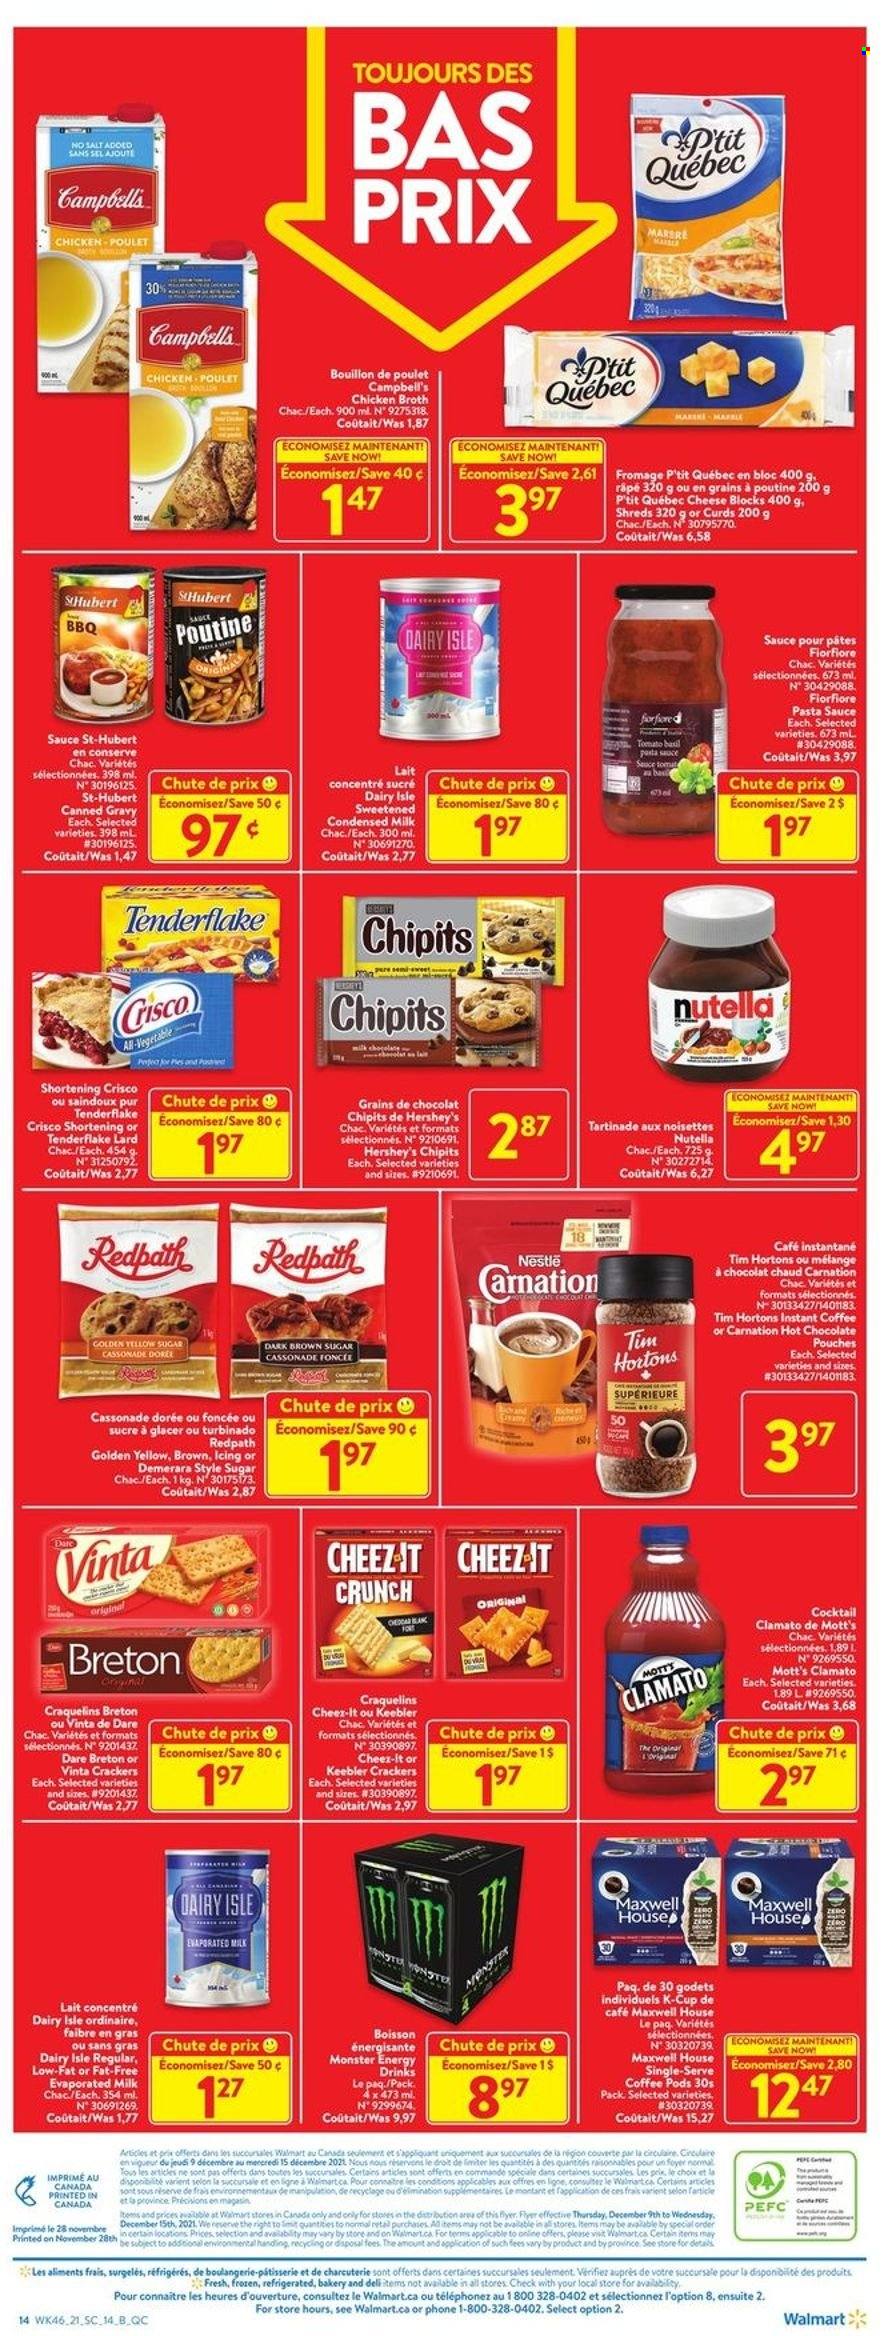 thumbnail - Walmart Flyer - December 09, 2021 - December 15, 2021 - Sales products - Mott's, Campbell's, pasta sauce, sauce, cheese, evaporated milk, condensed milk, Hershey's, crackers, Keebler, Cheez-It, bouillon, cane sugar, Crisco, demerara sugar, shortening, chicken broth, broth, esponja, energy drink, Monster, Clamato, Monster Energy, hot chocolate, Maxwell House, coffee pods, instant coffee, coffee capsules, K-Cups, Nestlé, lard, Nutella. Page 4.